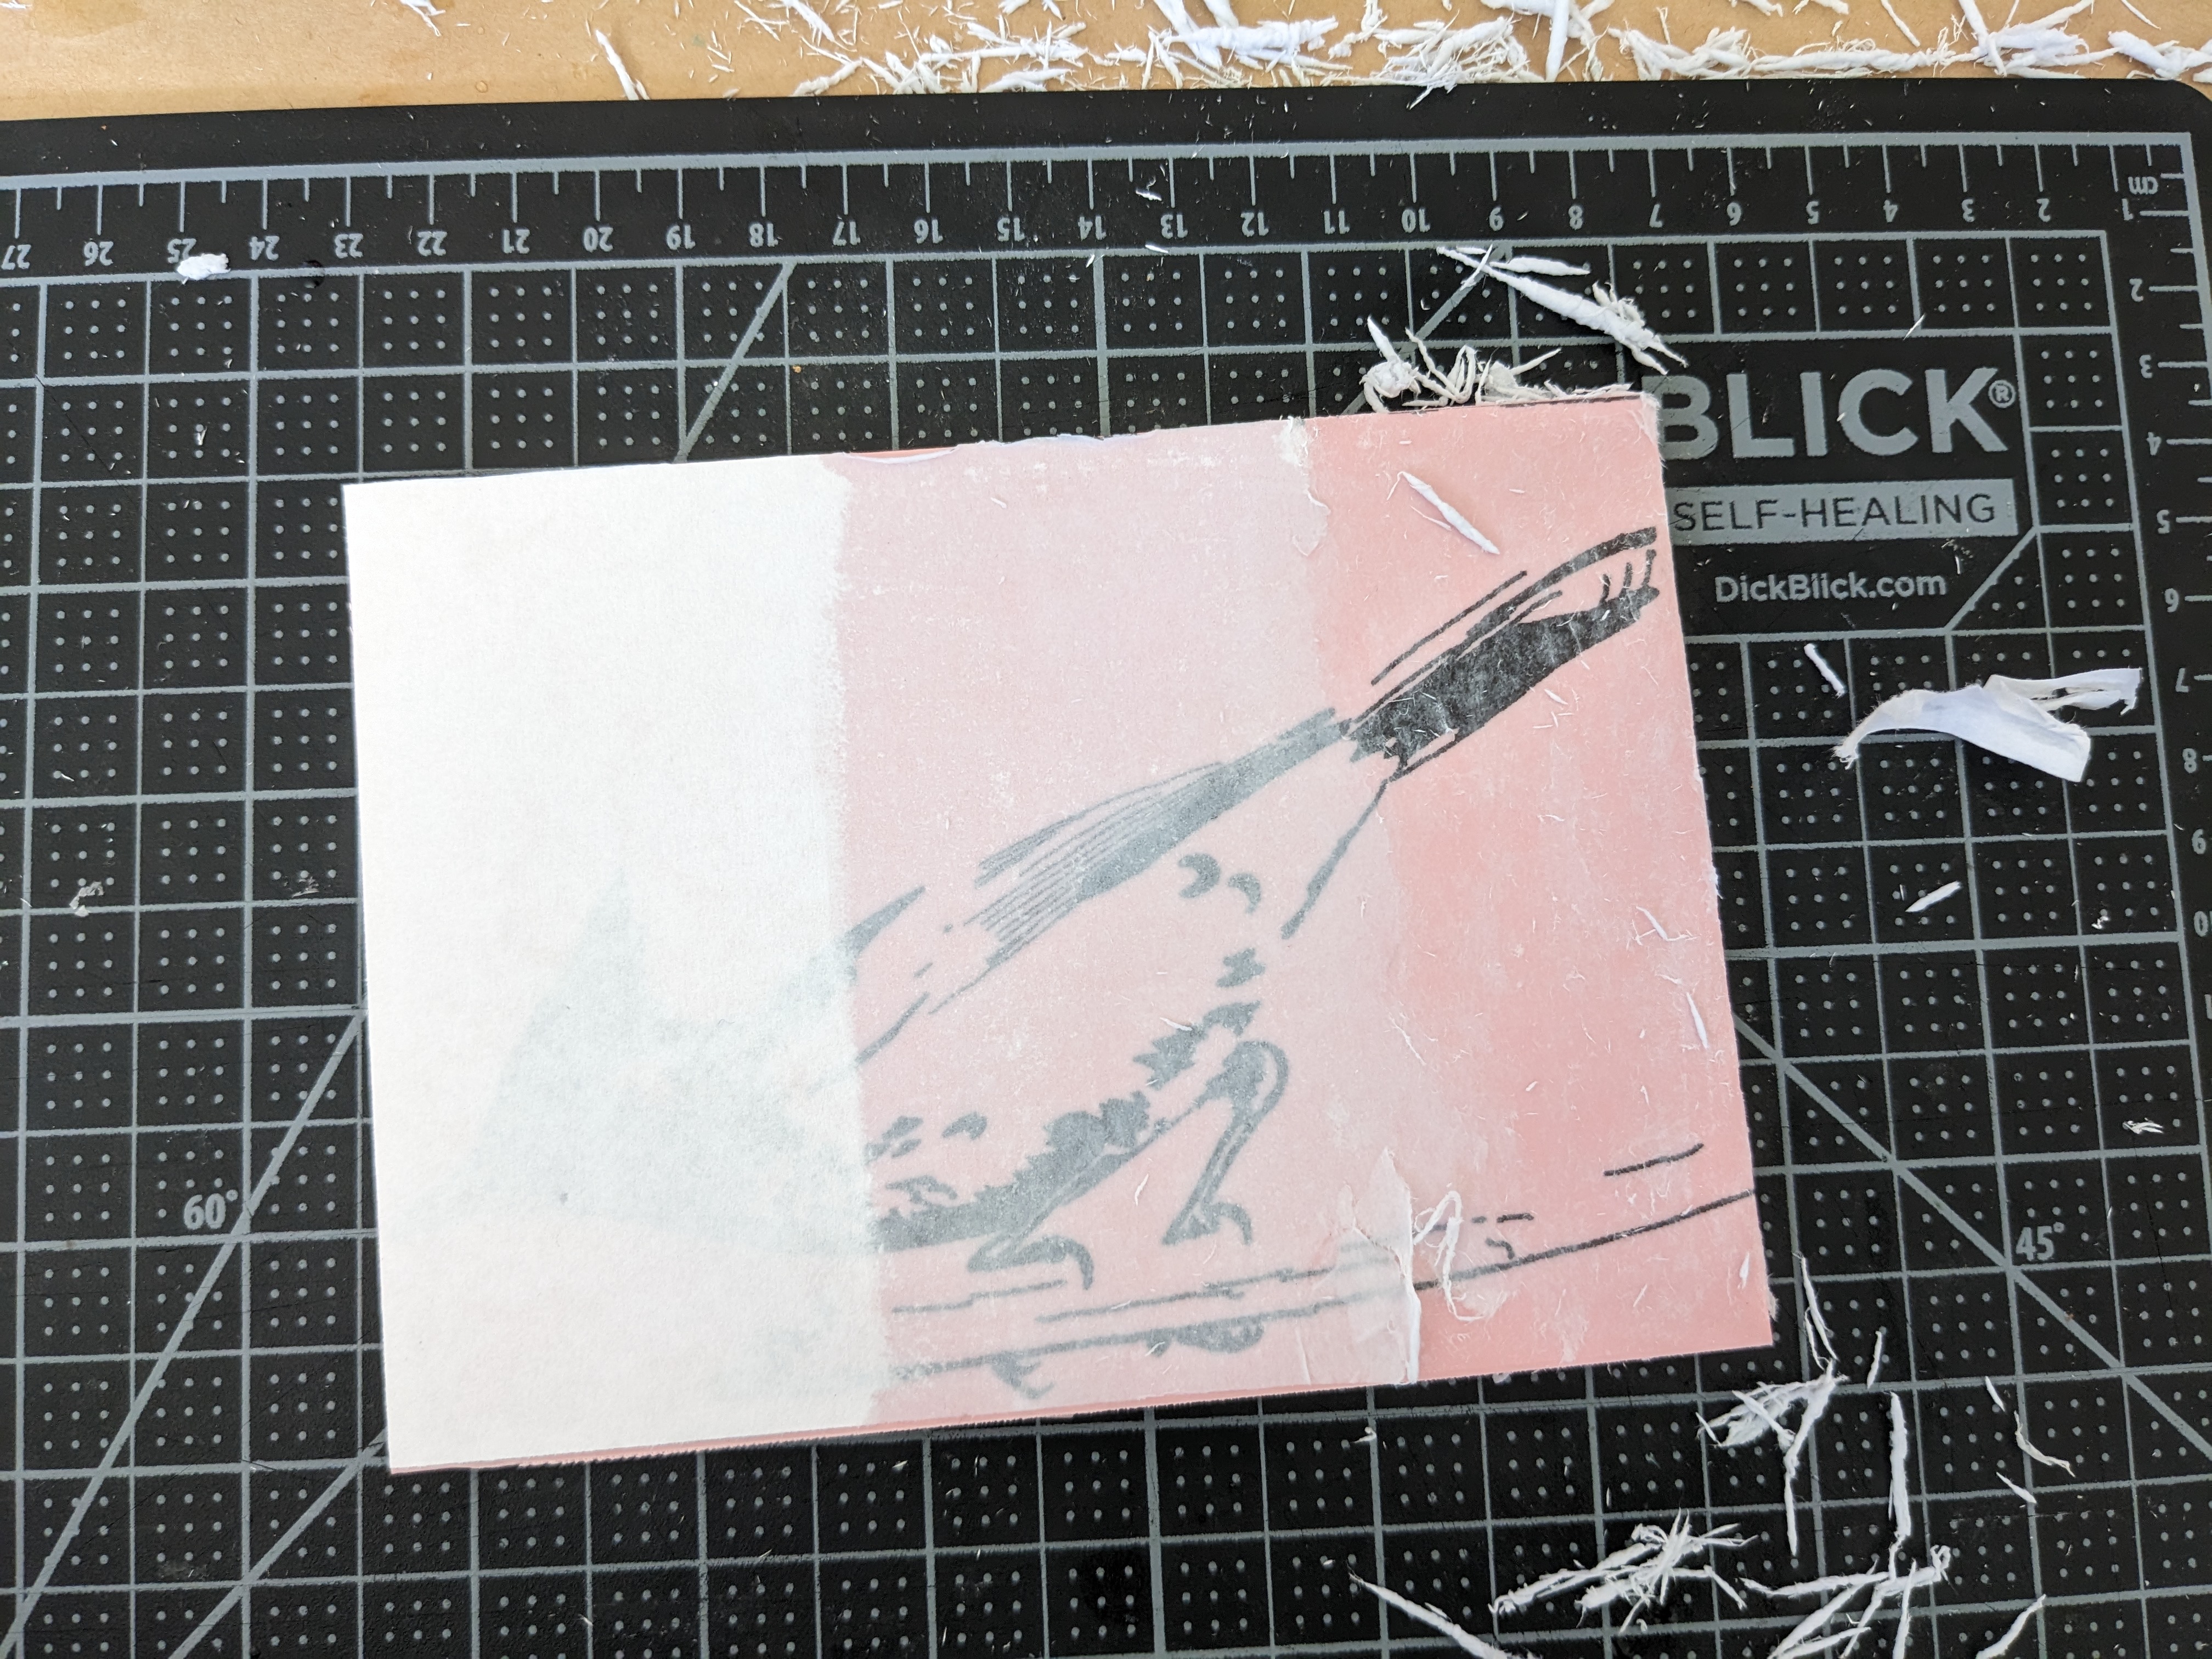 A pink block of carving material with a printed design of a bird attached to it. The paper has been partially rubbed away (process described in this post) to reveal the inked design on the carving material.